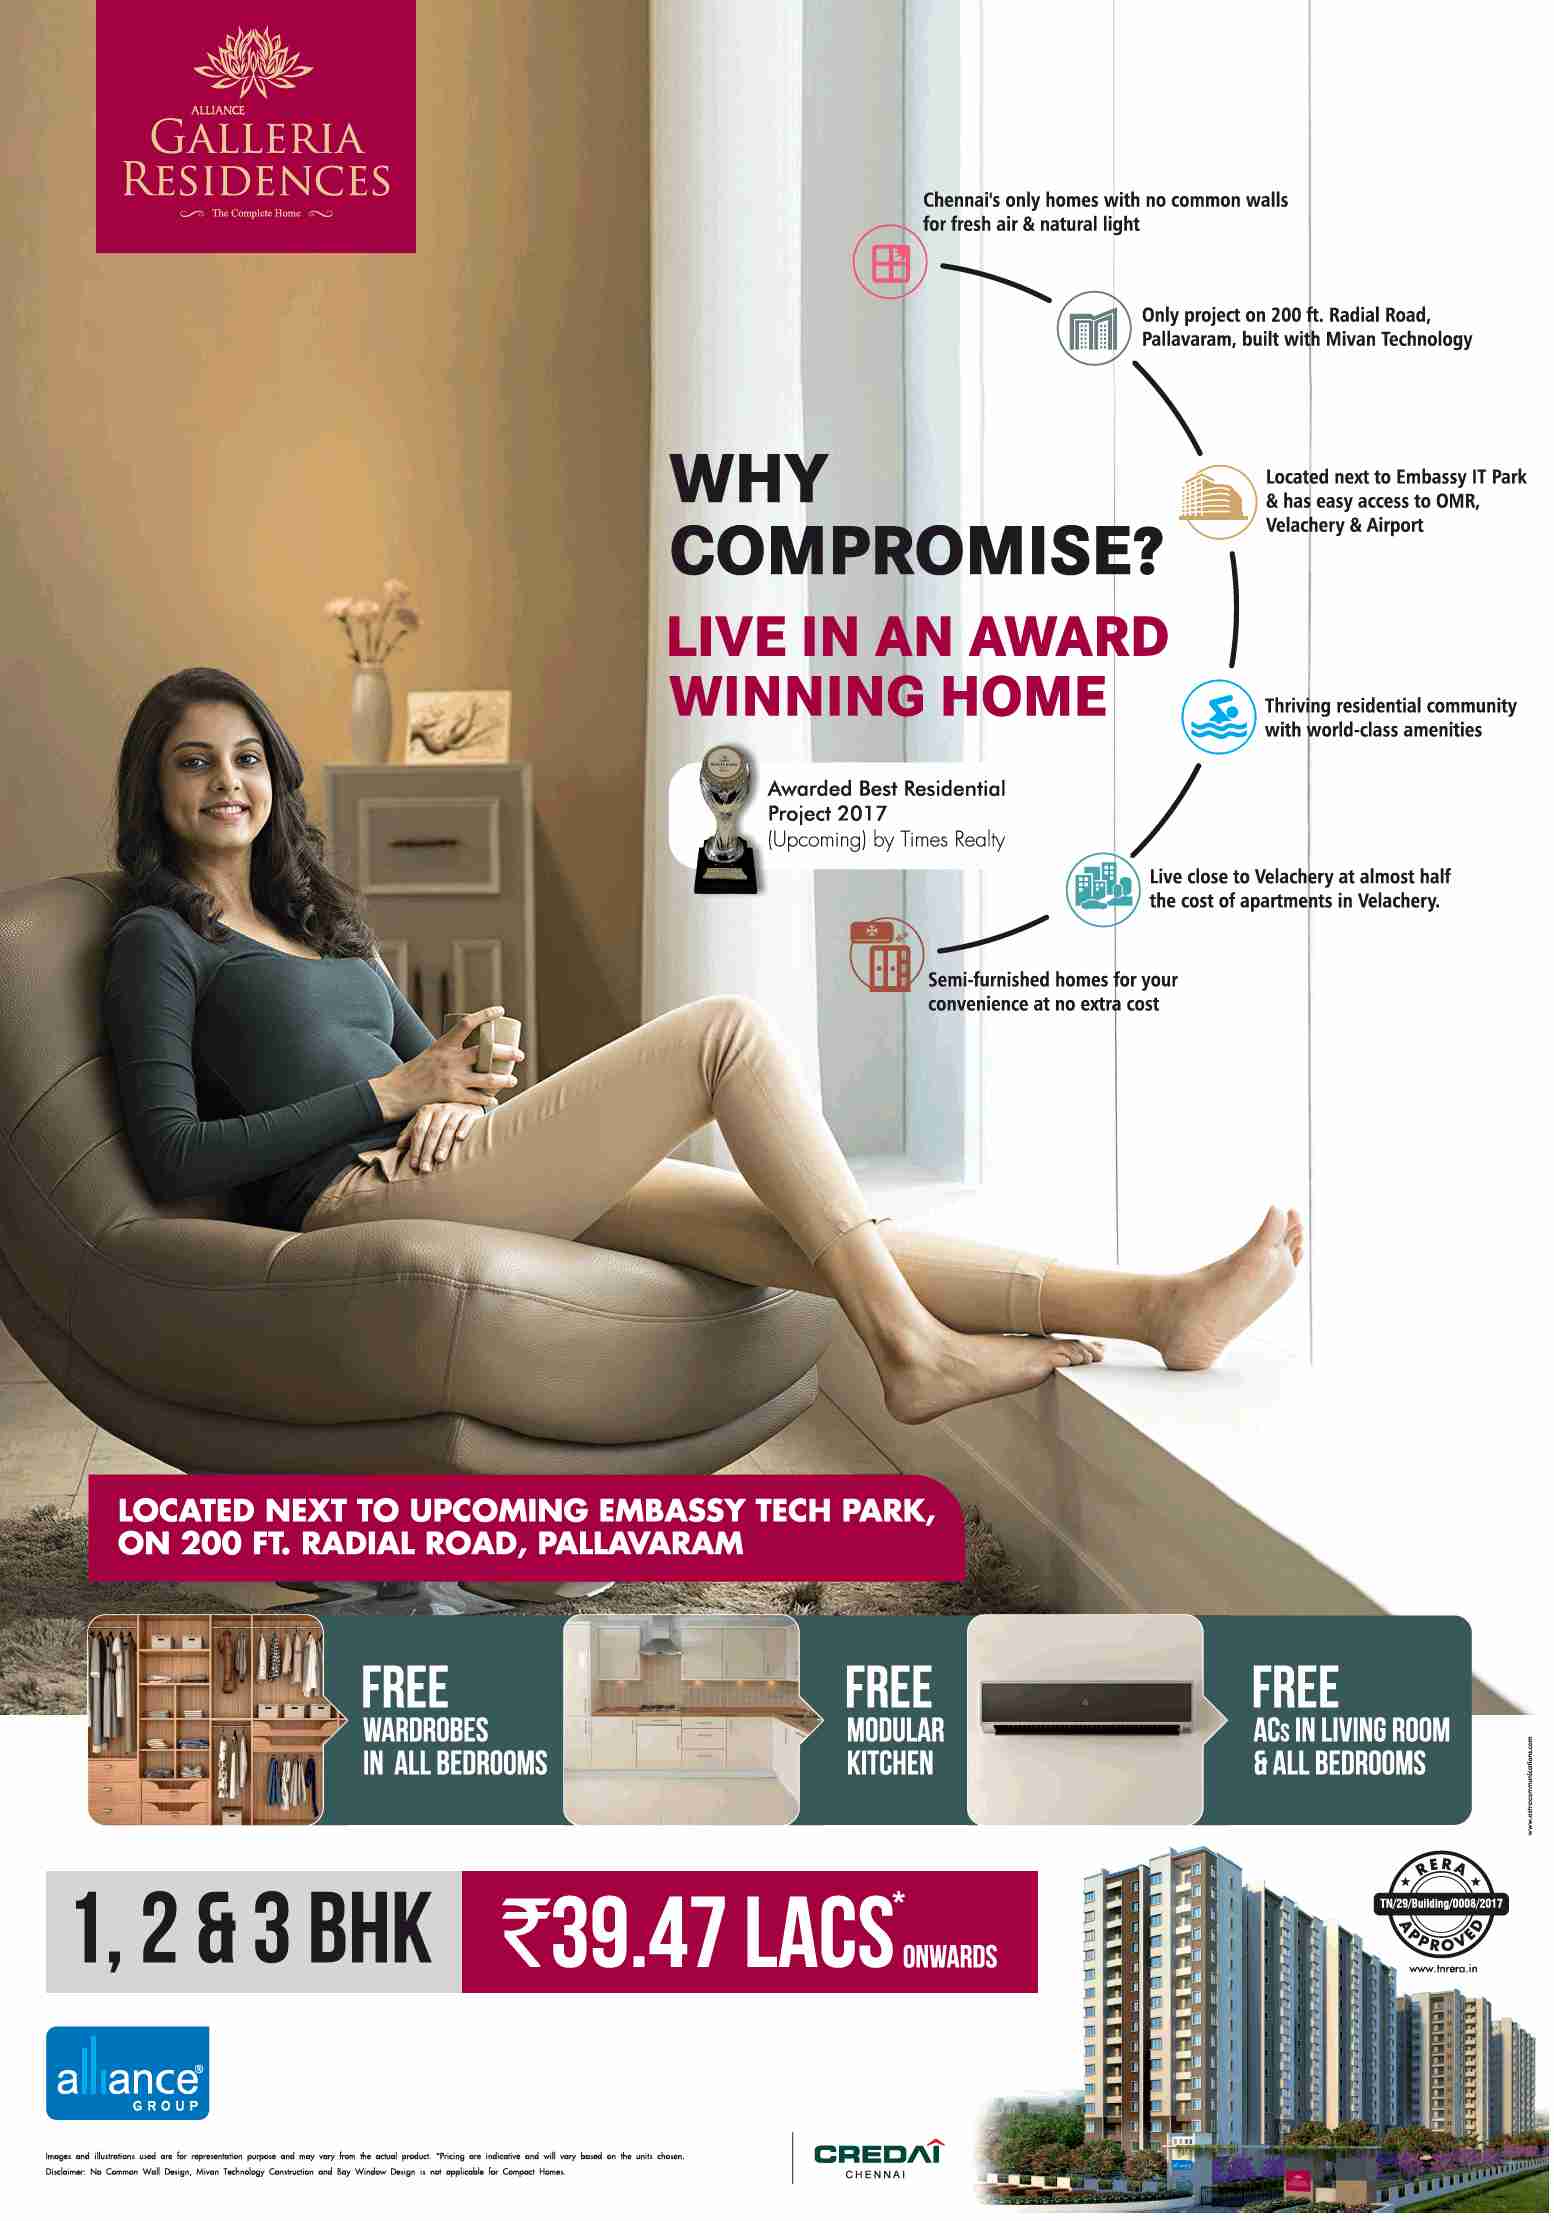 Live in award winning home at Alliance Galleria Residences in Chennai